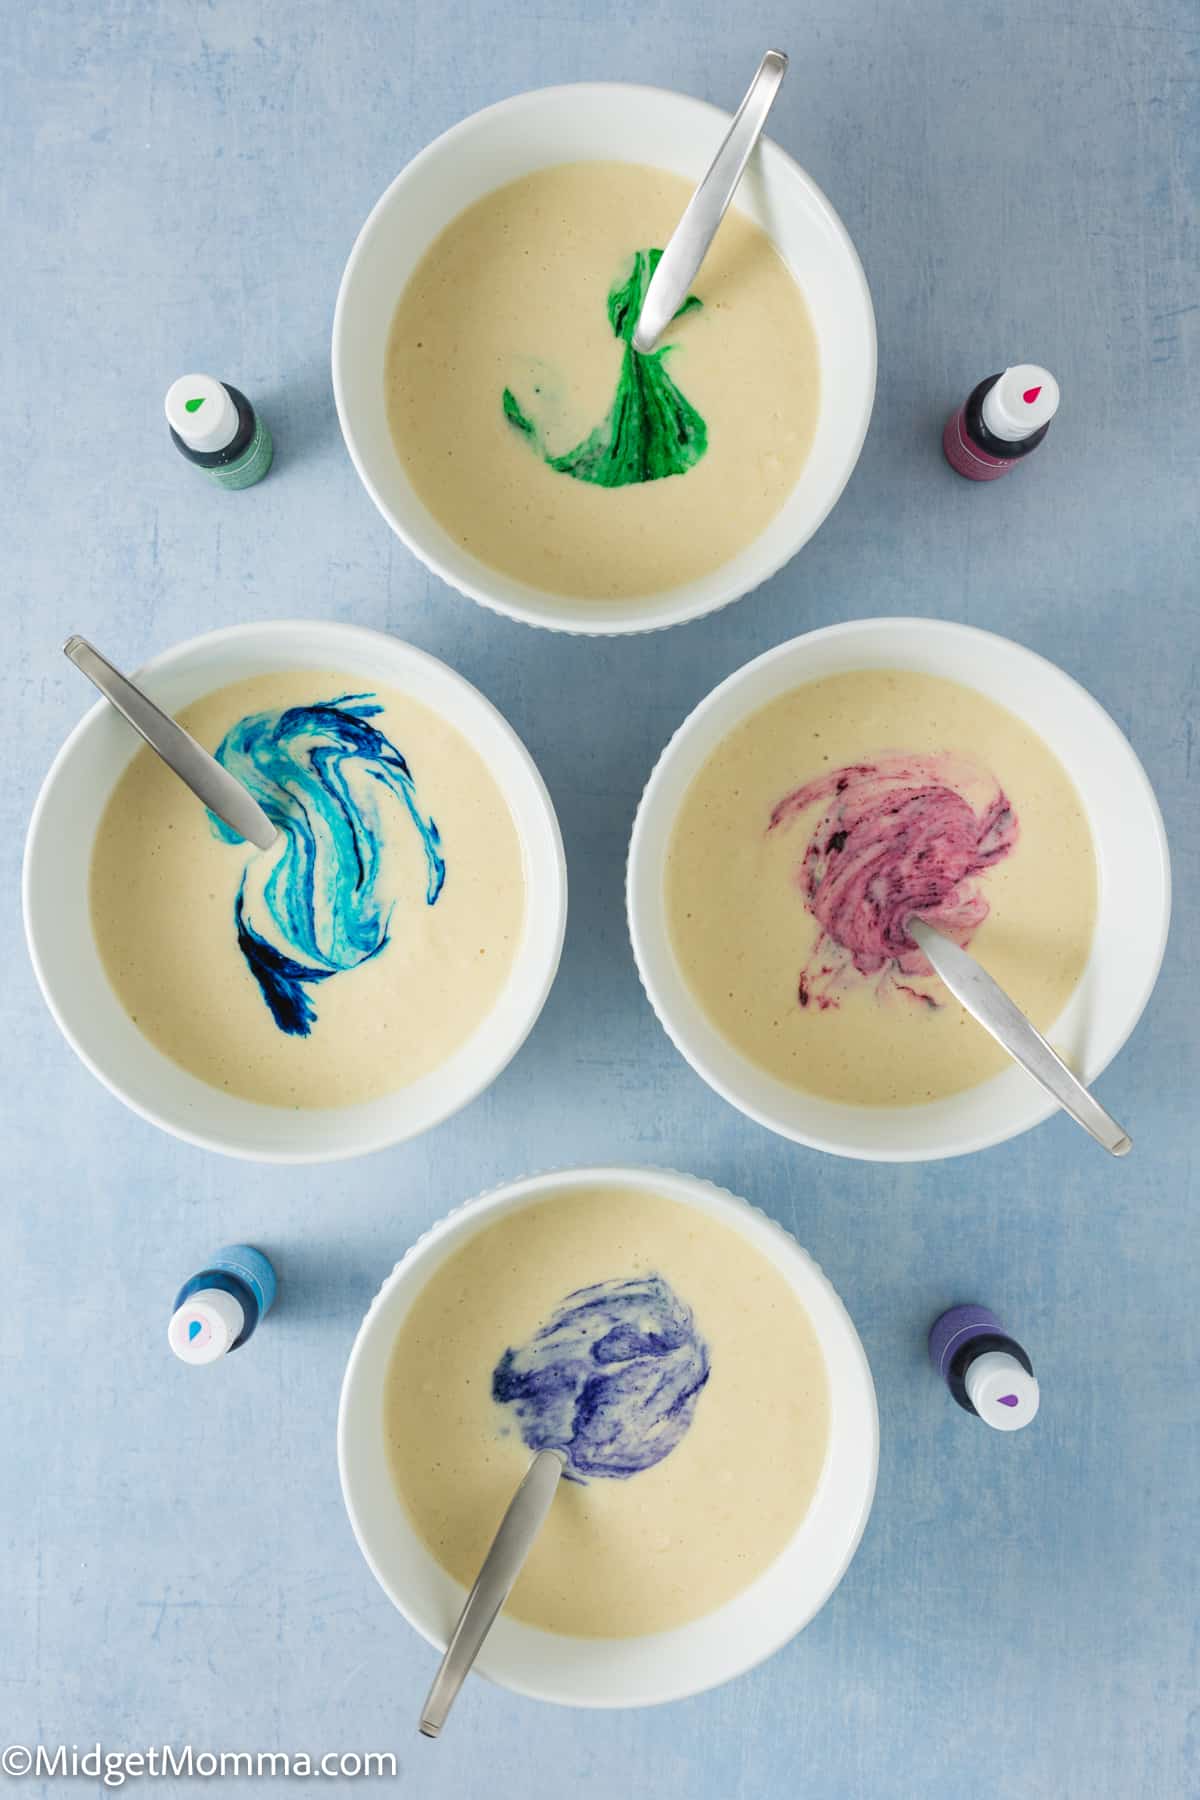 Four bowls with different colors of food coloring added to the batter in them.